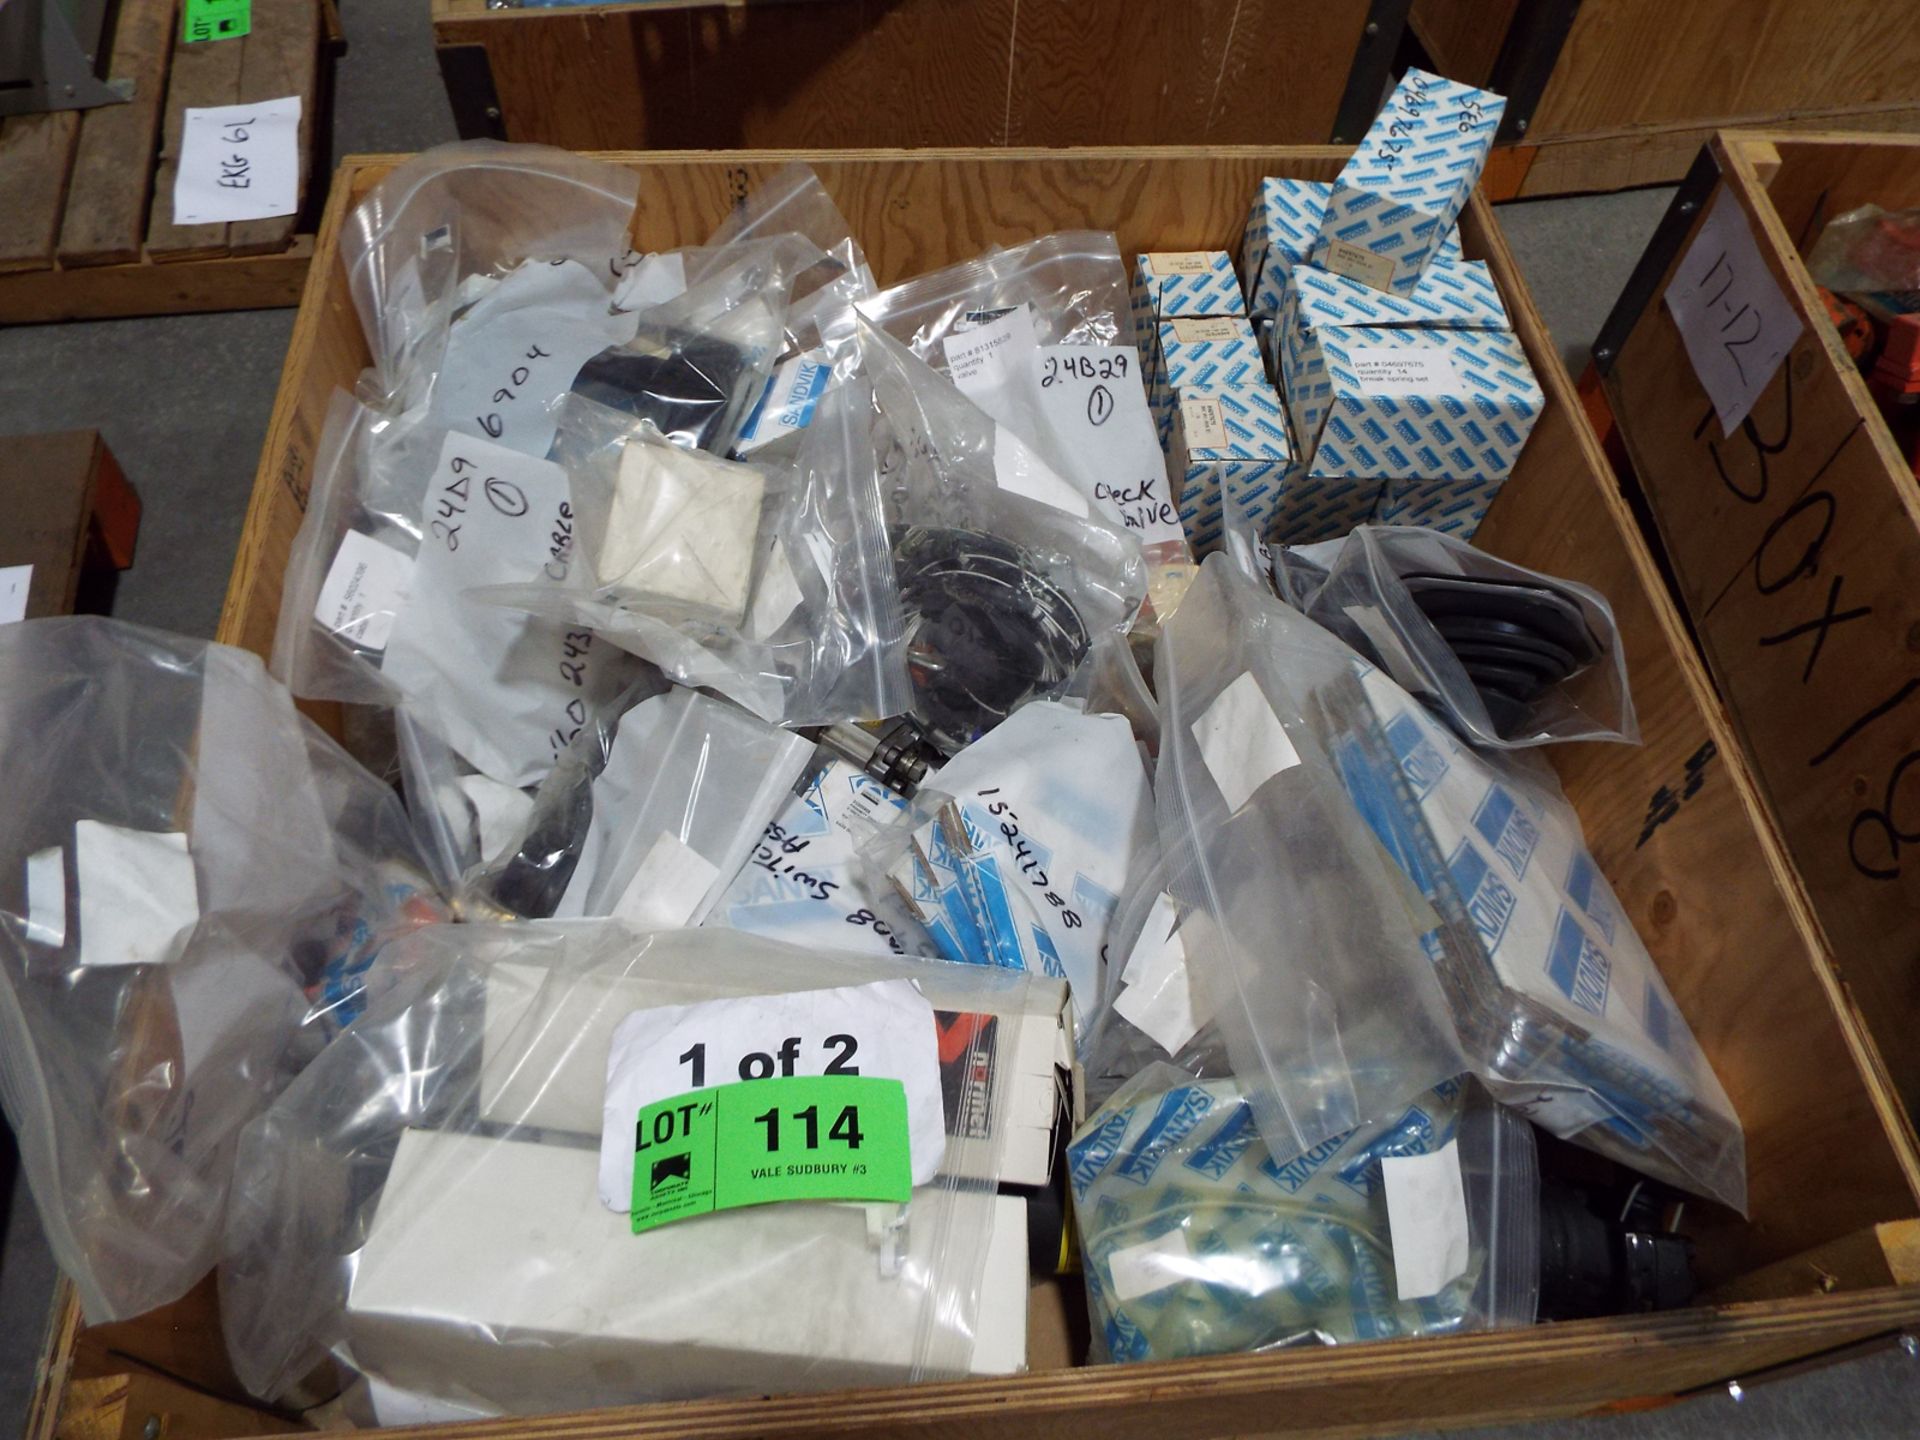 LOT/ SANDVIK PARTS INCLUDING COVER GLASS, CABLE, VALVE, PROXIMITY SWITCH, COUPLINGS, AND BREAK